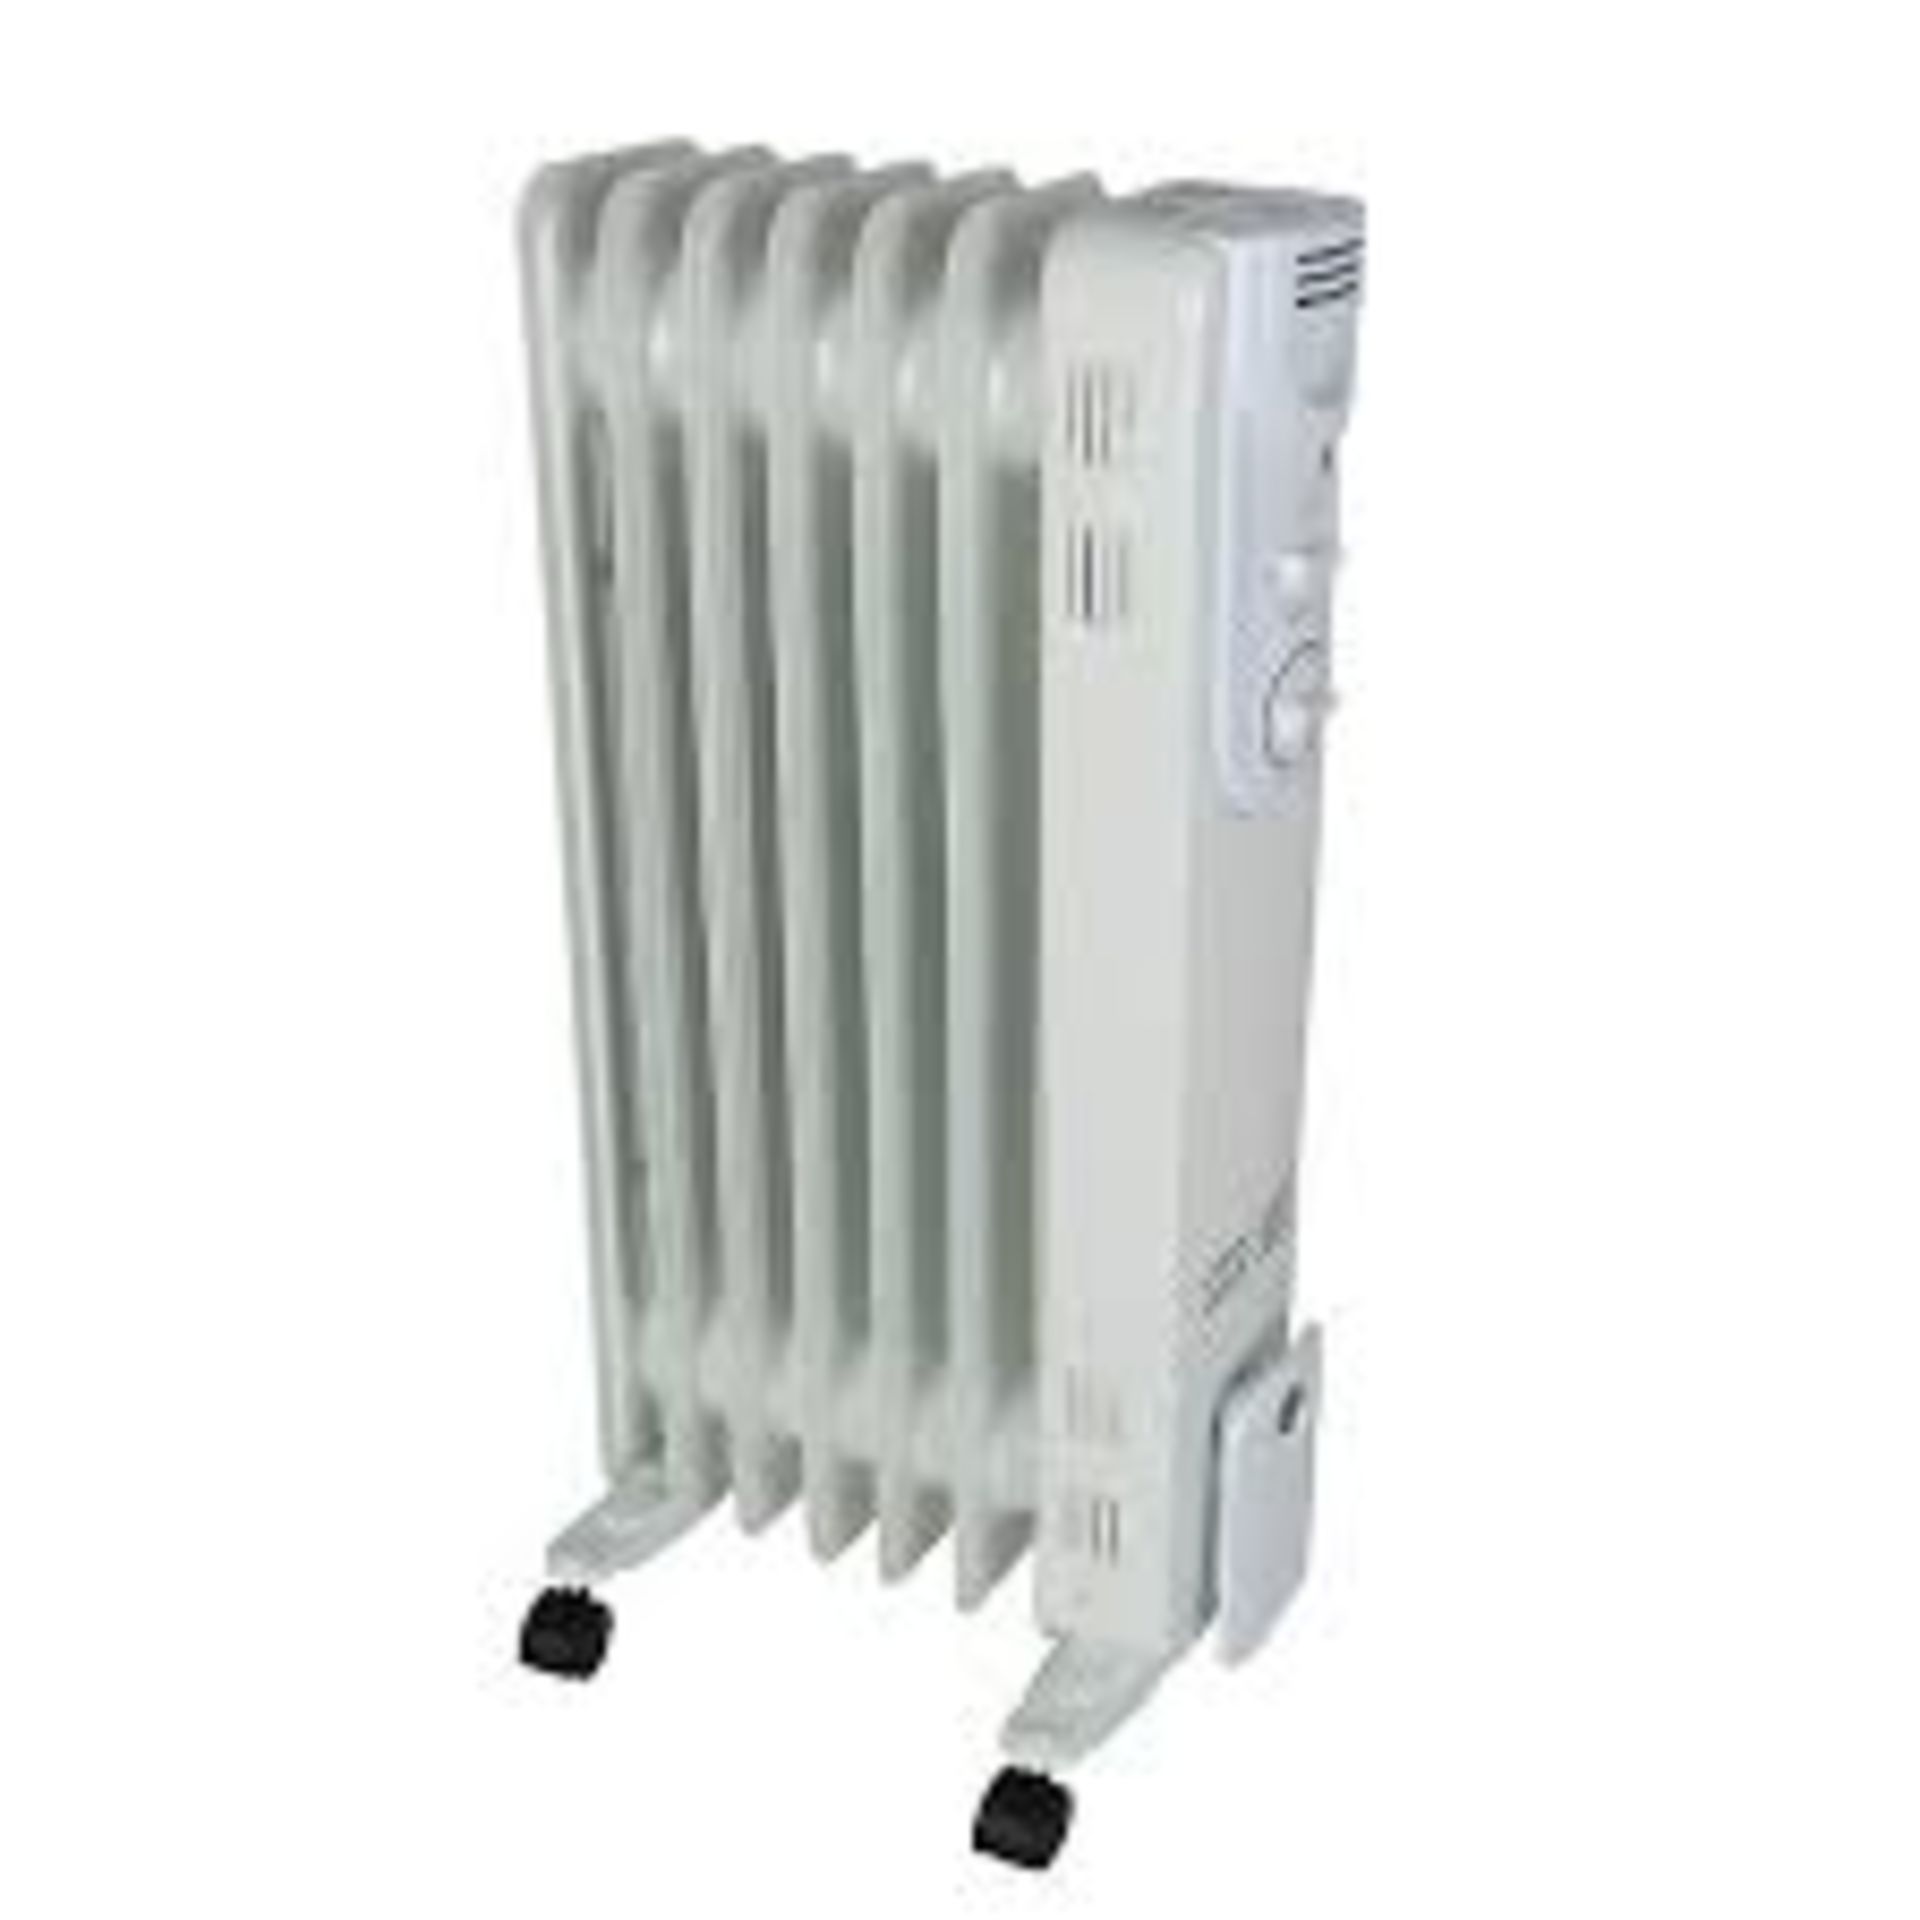 Essentials 1500W Oil-Filled Radiator. -ER47. This oil filled radiator distributes heat evenly and